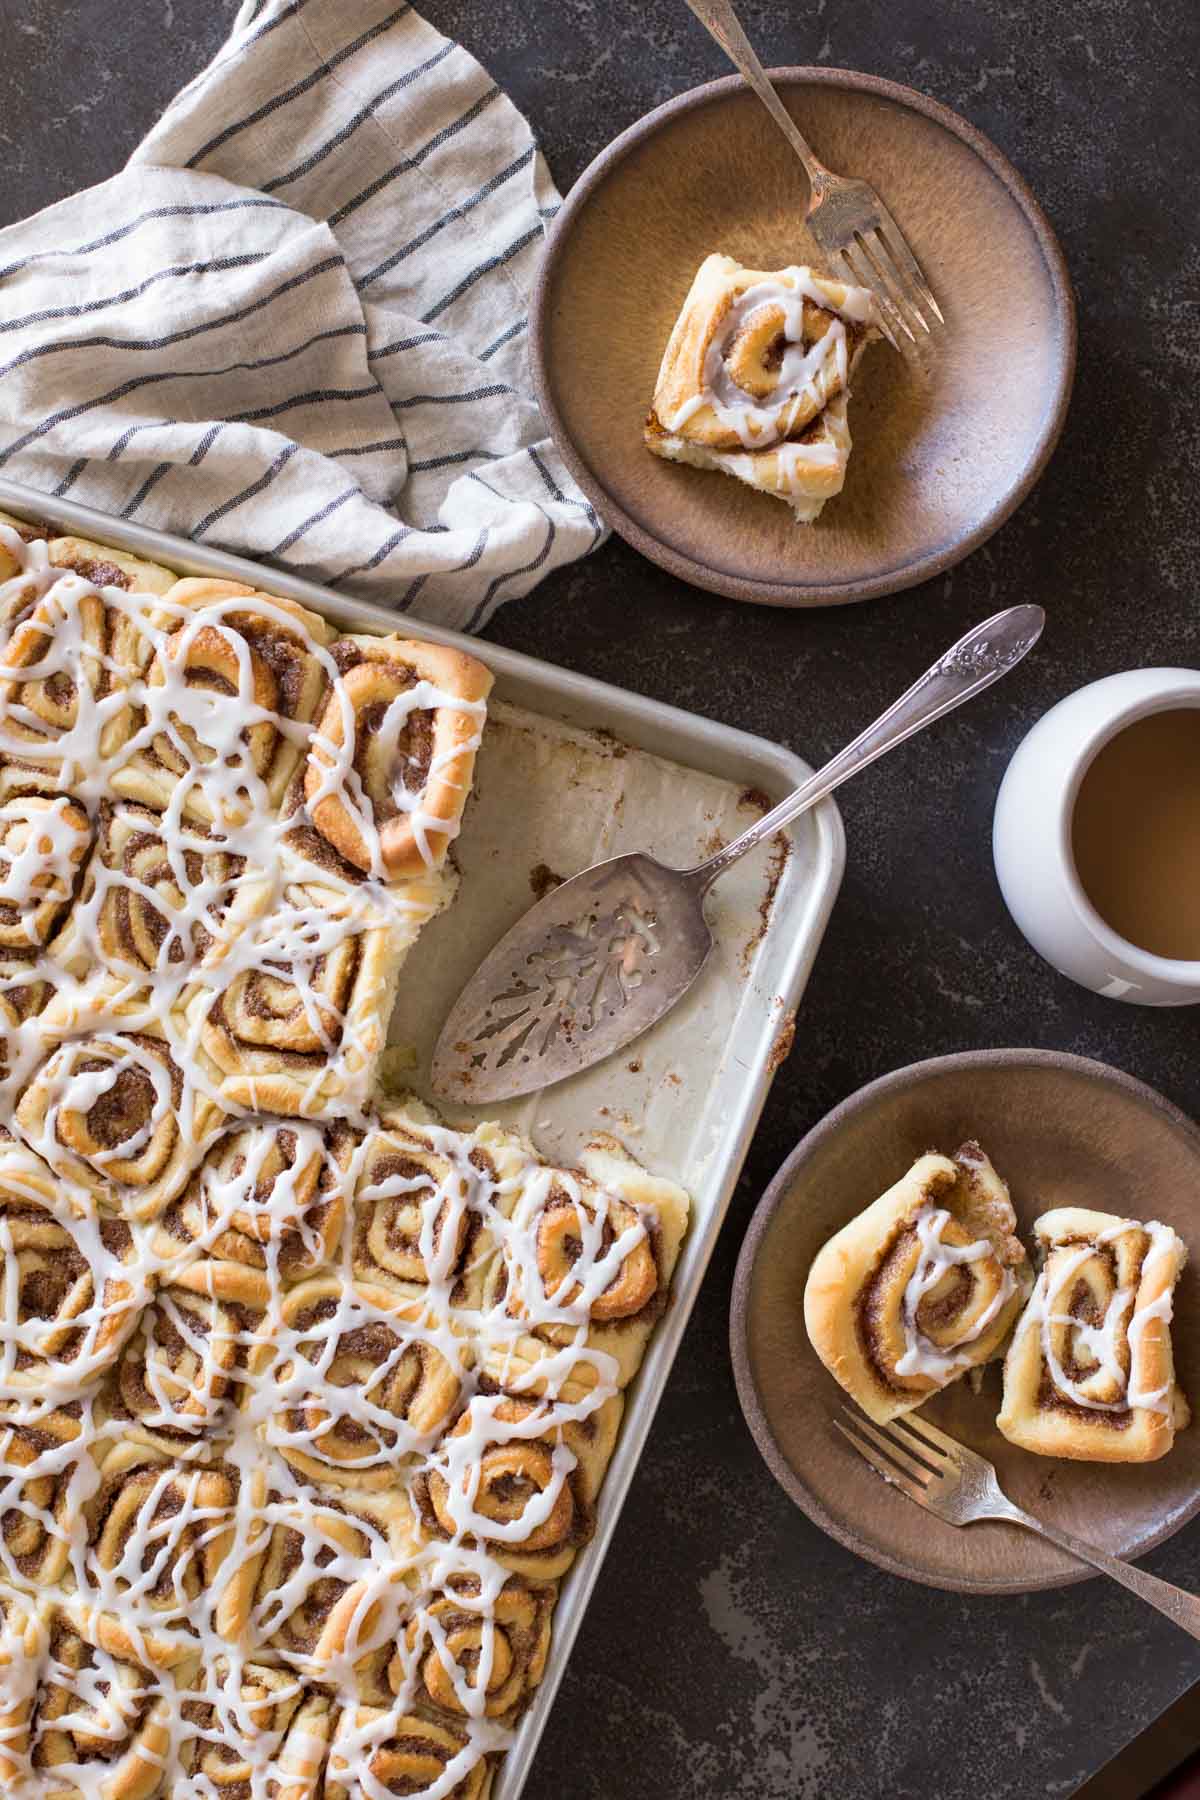 Sheet Pan Cinnamon Rolls on two plates with forks, sitting next to a cup of coffee and the baking sheet of the rest of the cinnamon rolls with a serving utensil.  